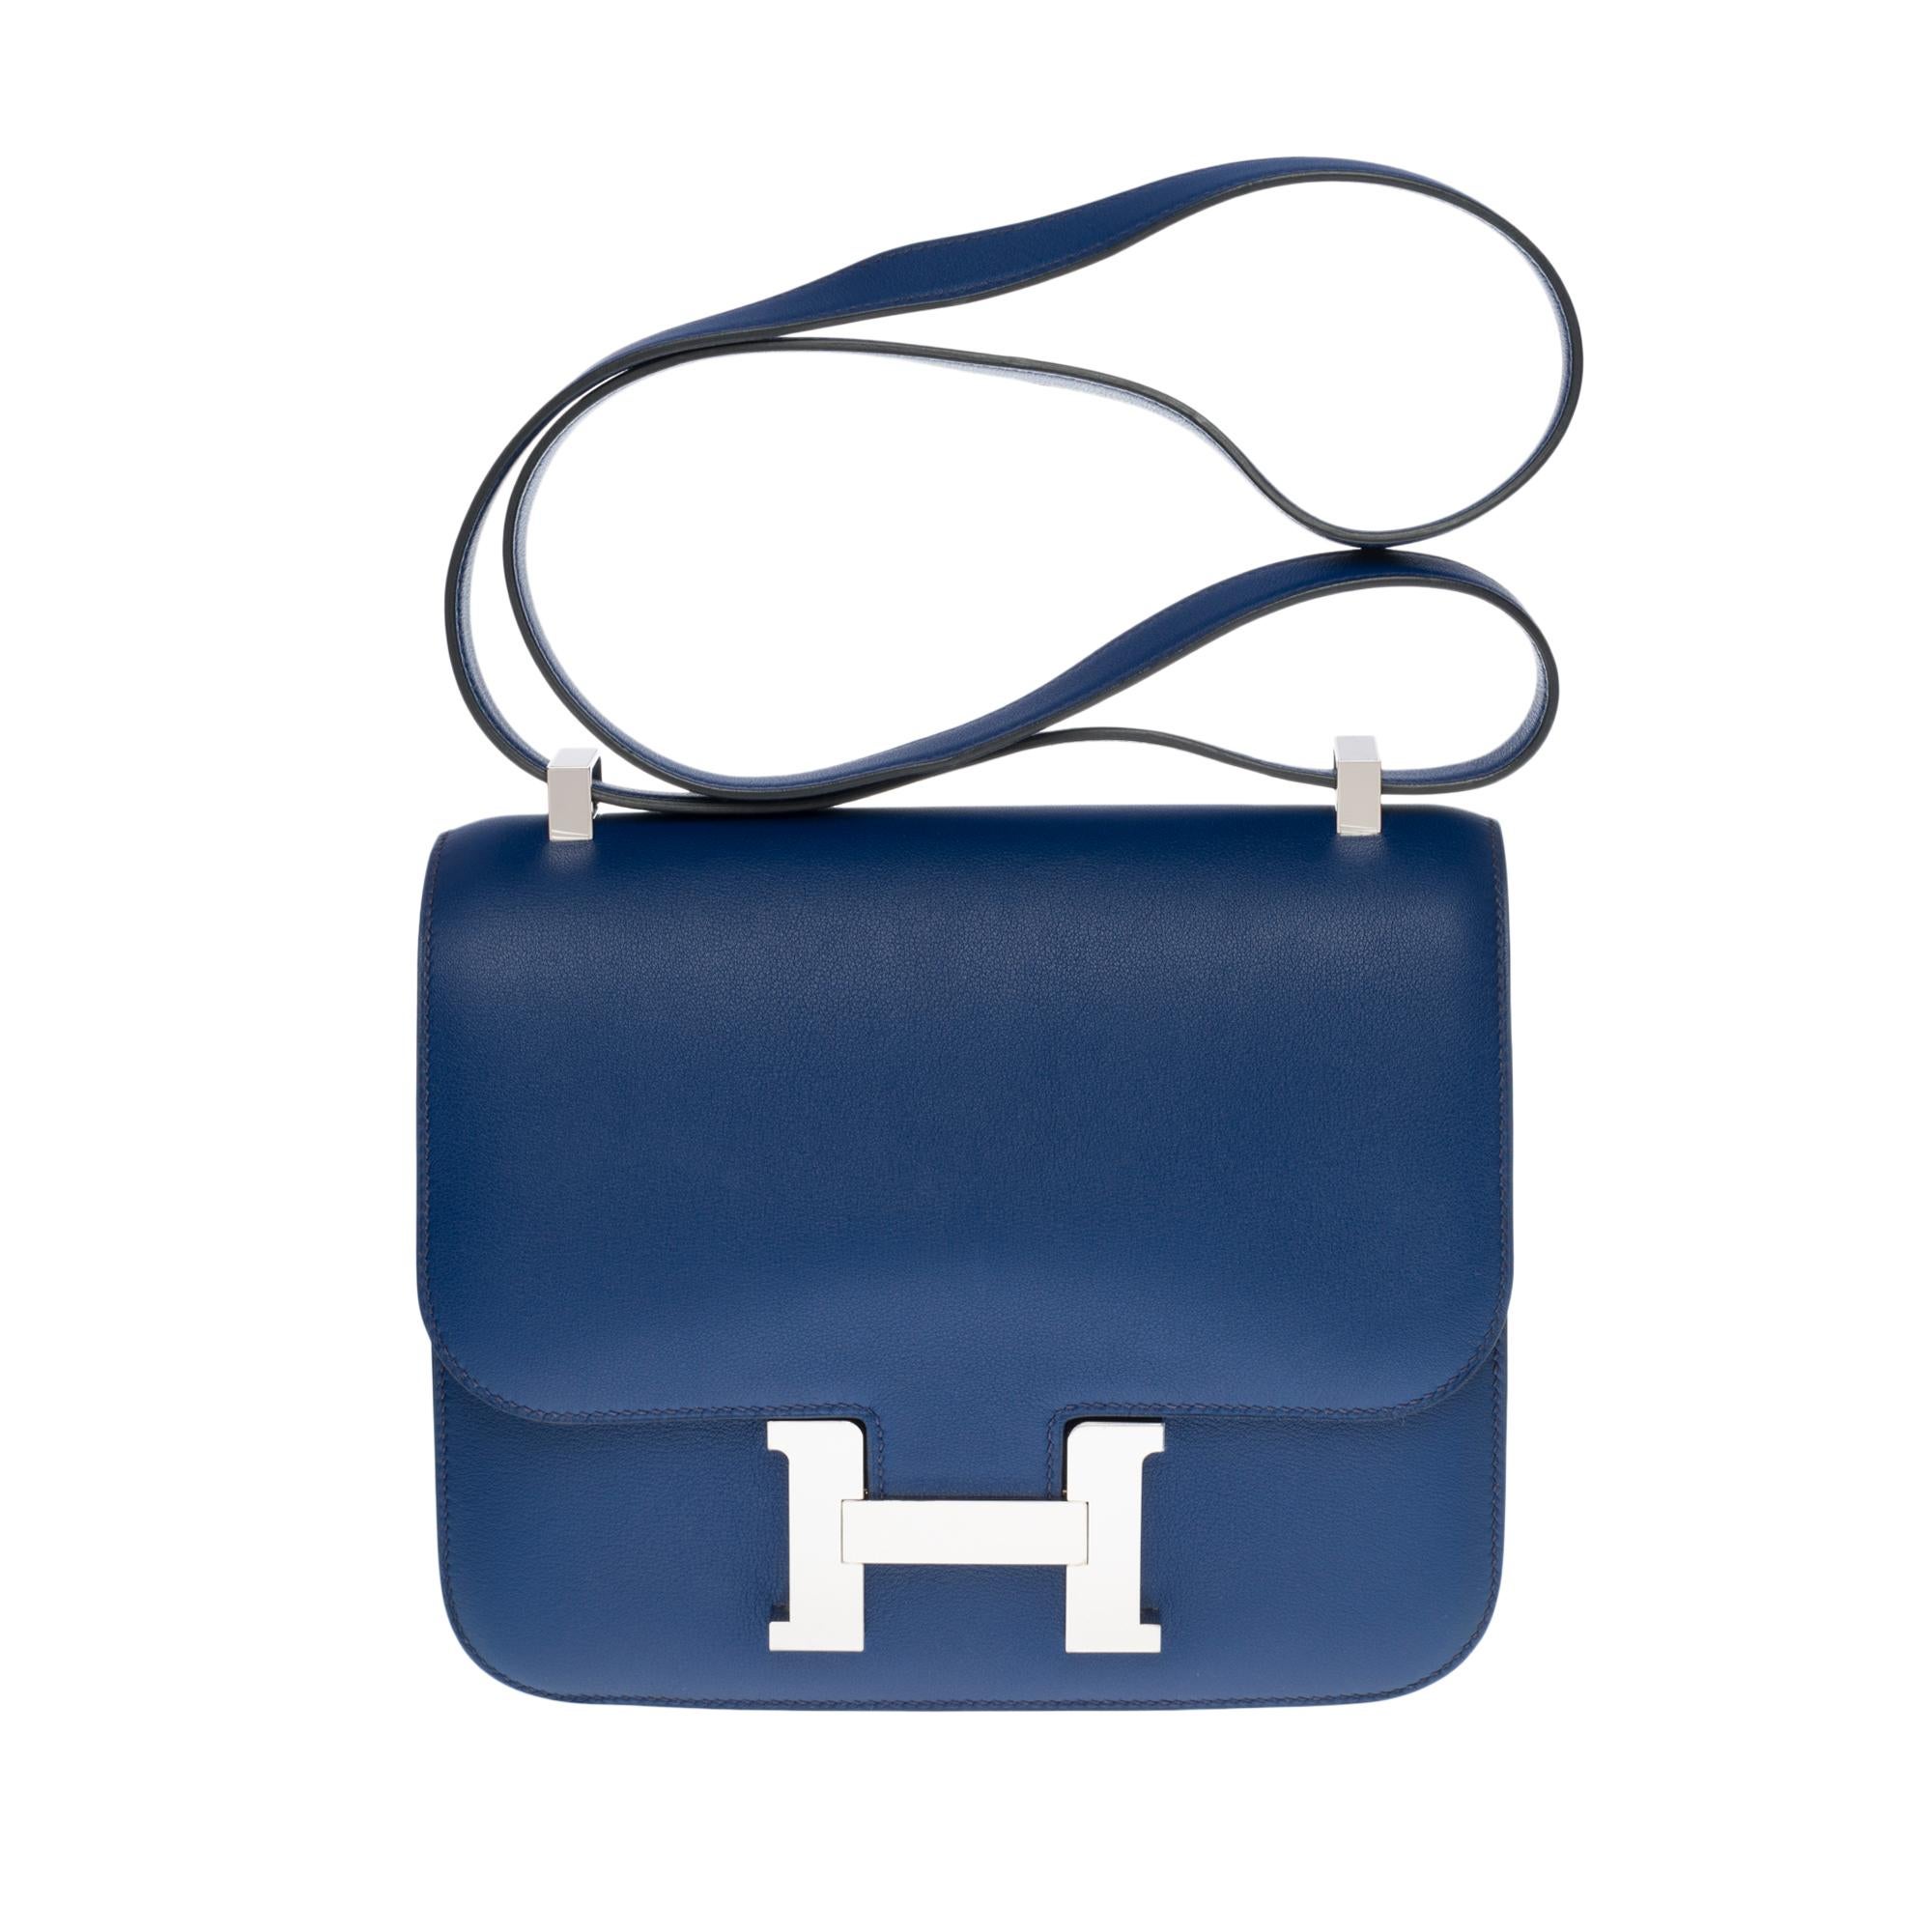 SPECIAL ORDER - HSS CONSTANCE 24

Splendid and Rare Hermès Constance24 shoulder bag Special order (recognizable by horseshoe) in sapphire blue Evercolor leather, palladium silver metal hardware, a shoulder strap in blue leather allowing a shoulder